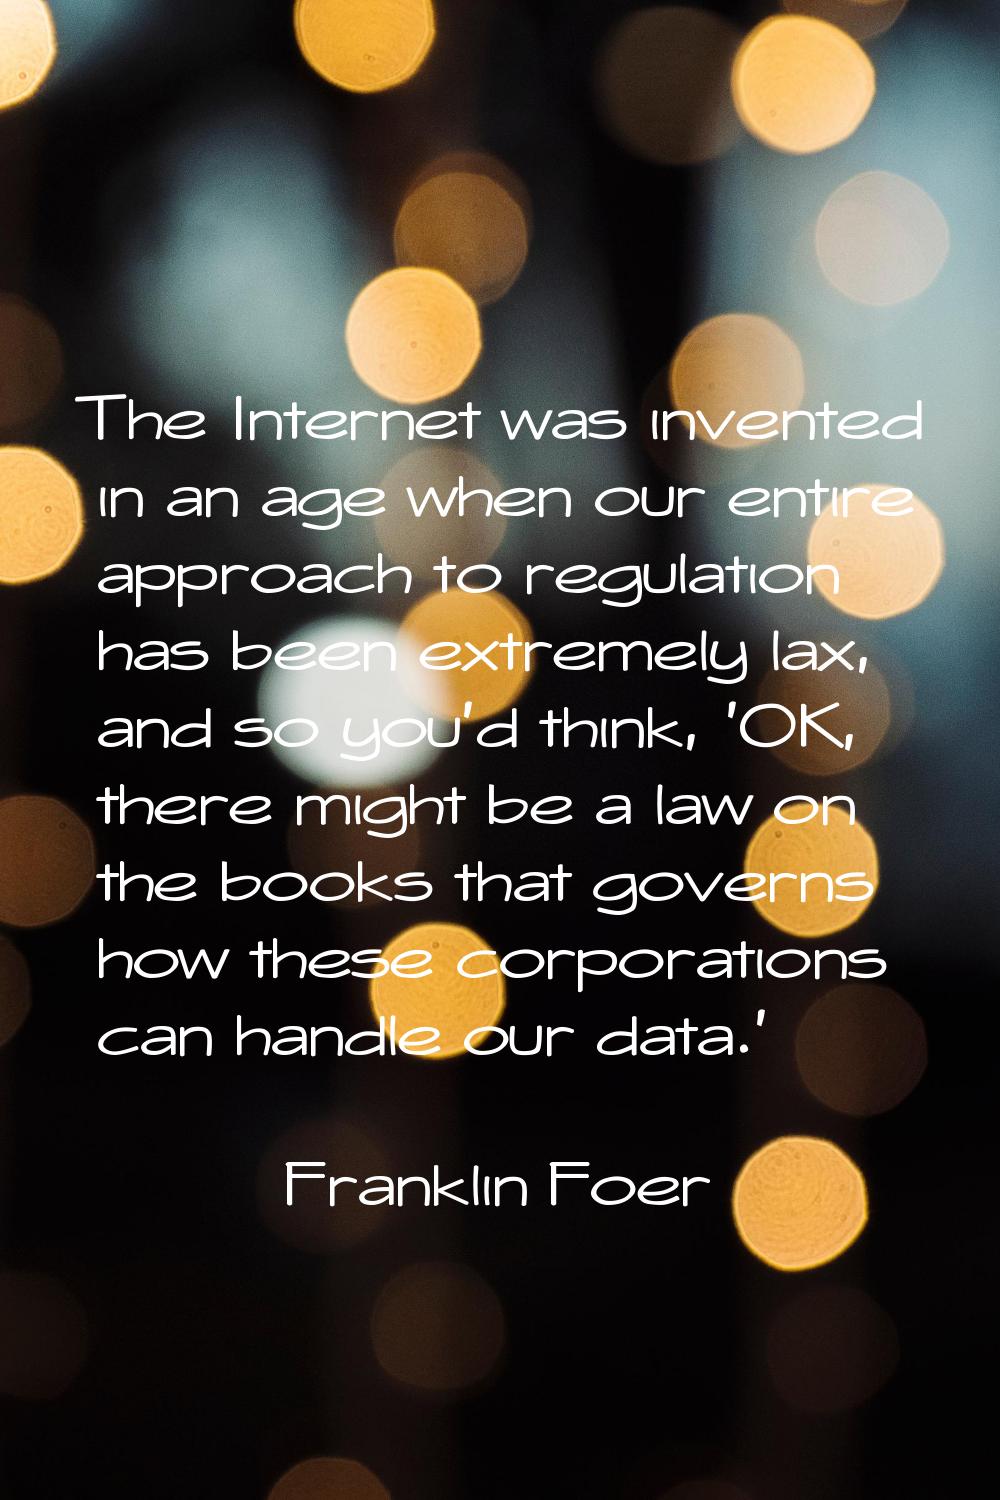 The Internet was invented in an age when our entire approach to regulation has been extremely lax, 